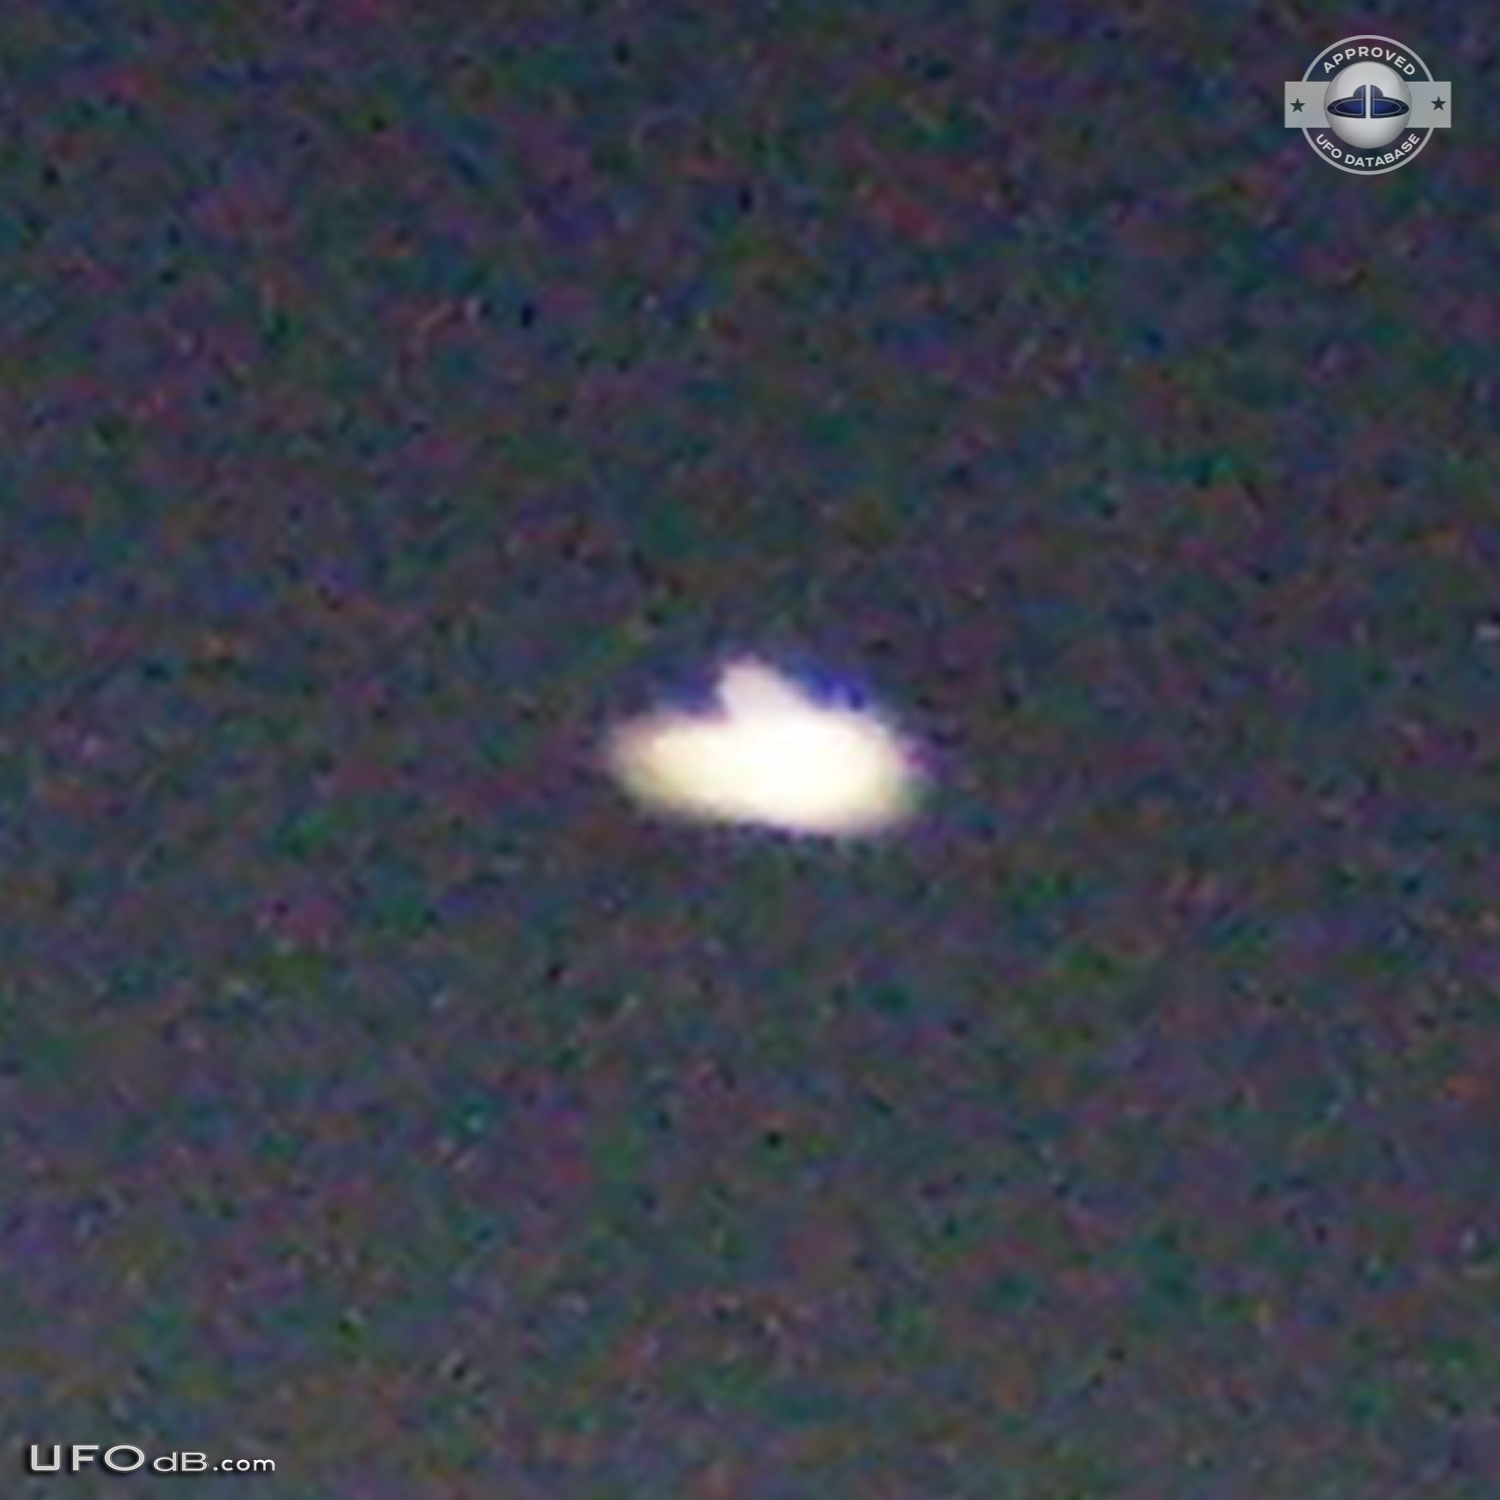 White Saucer ufo caught on picture at night over Curico, Chile - 2012 UFO Picture #406-4